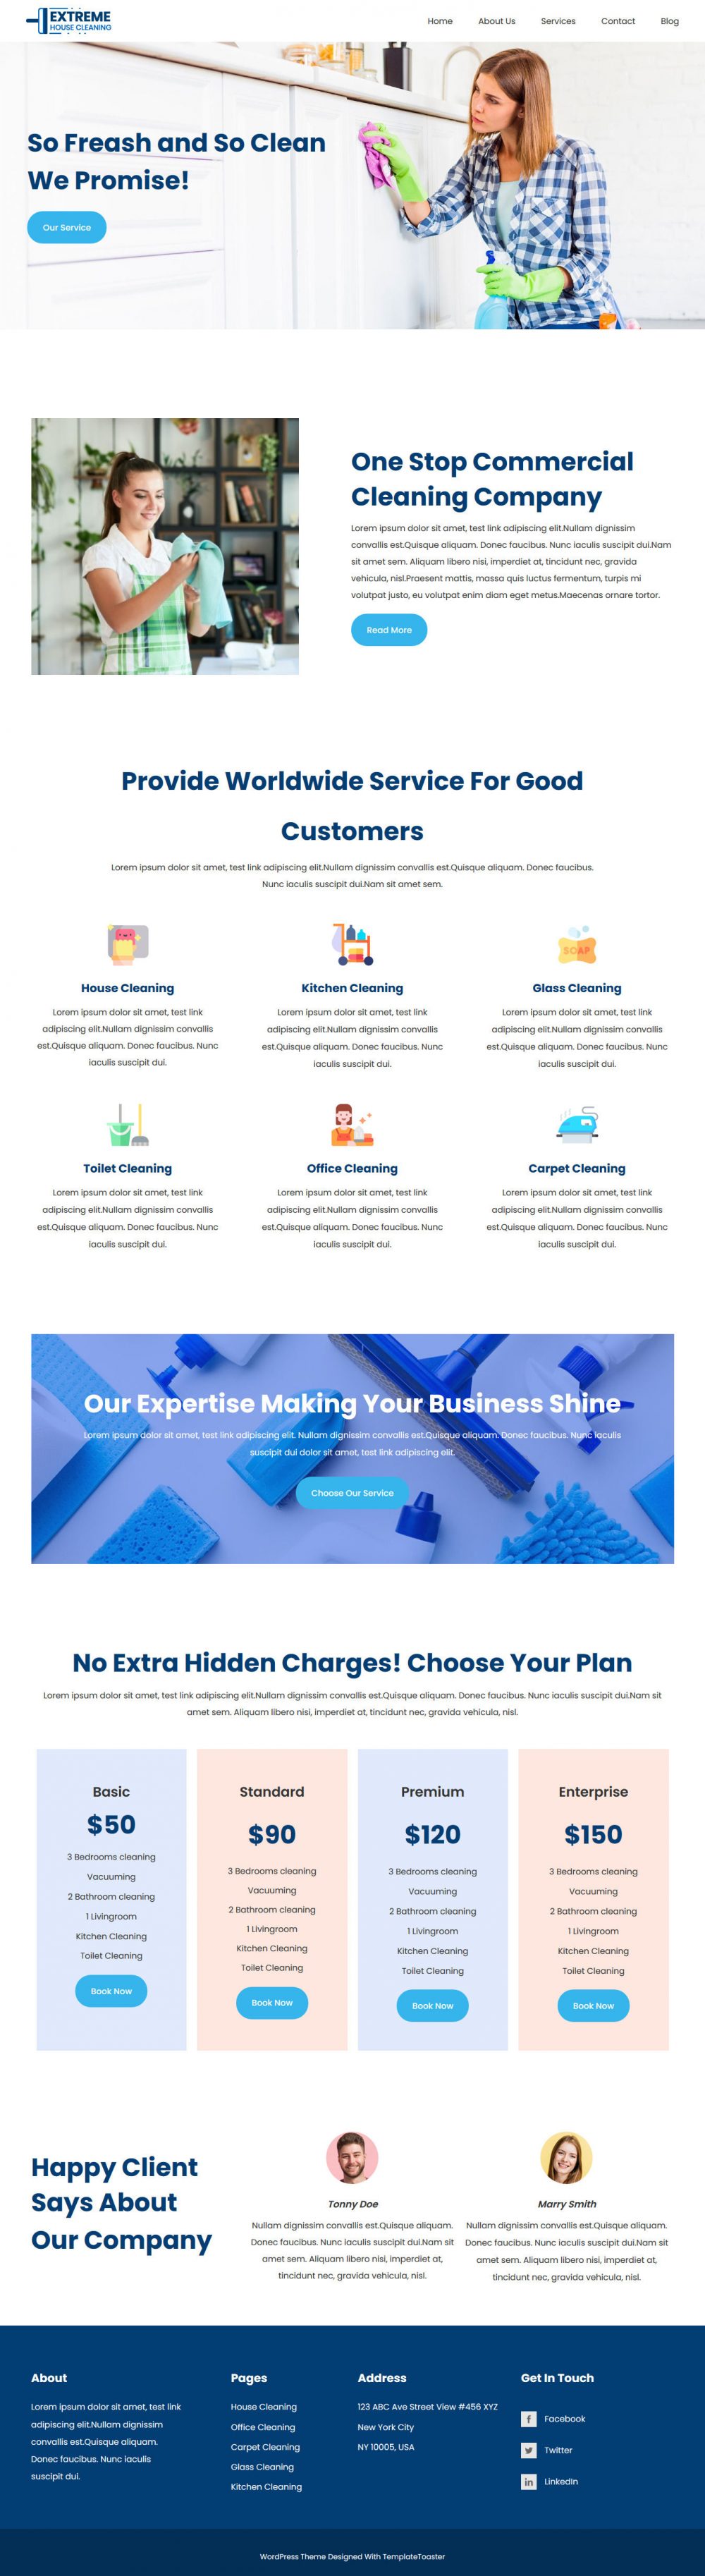 extreme house cleaning company drupal theme